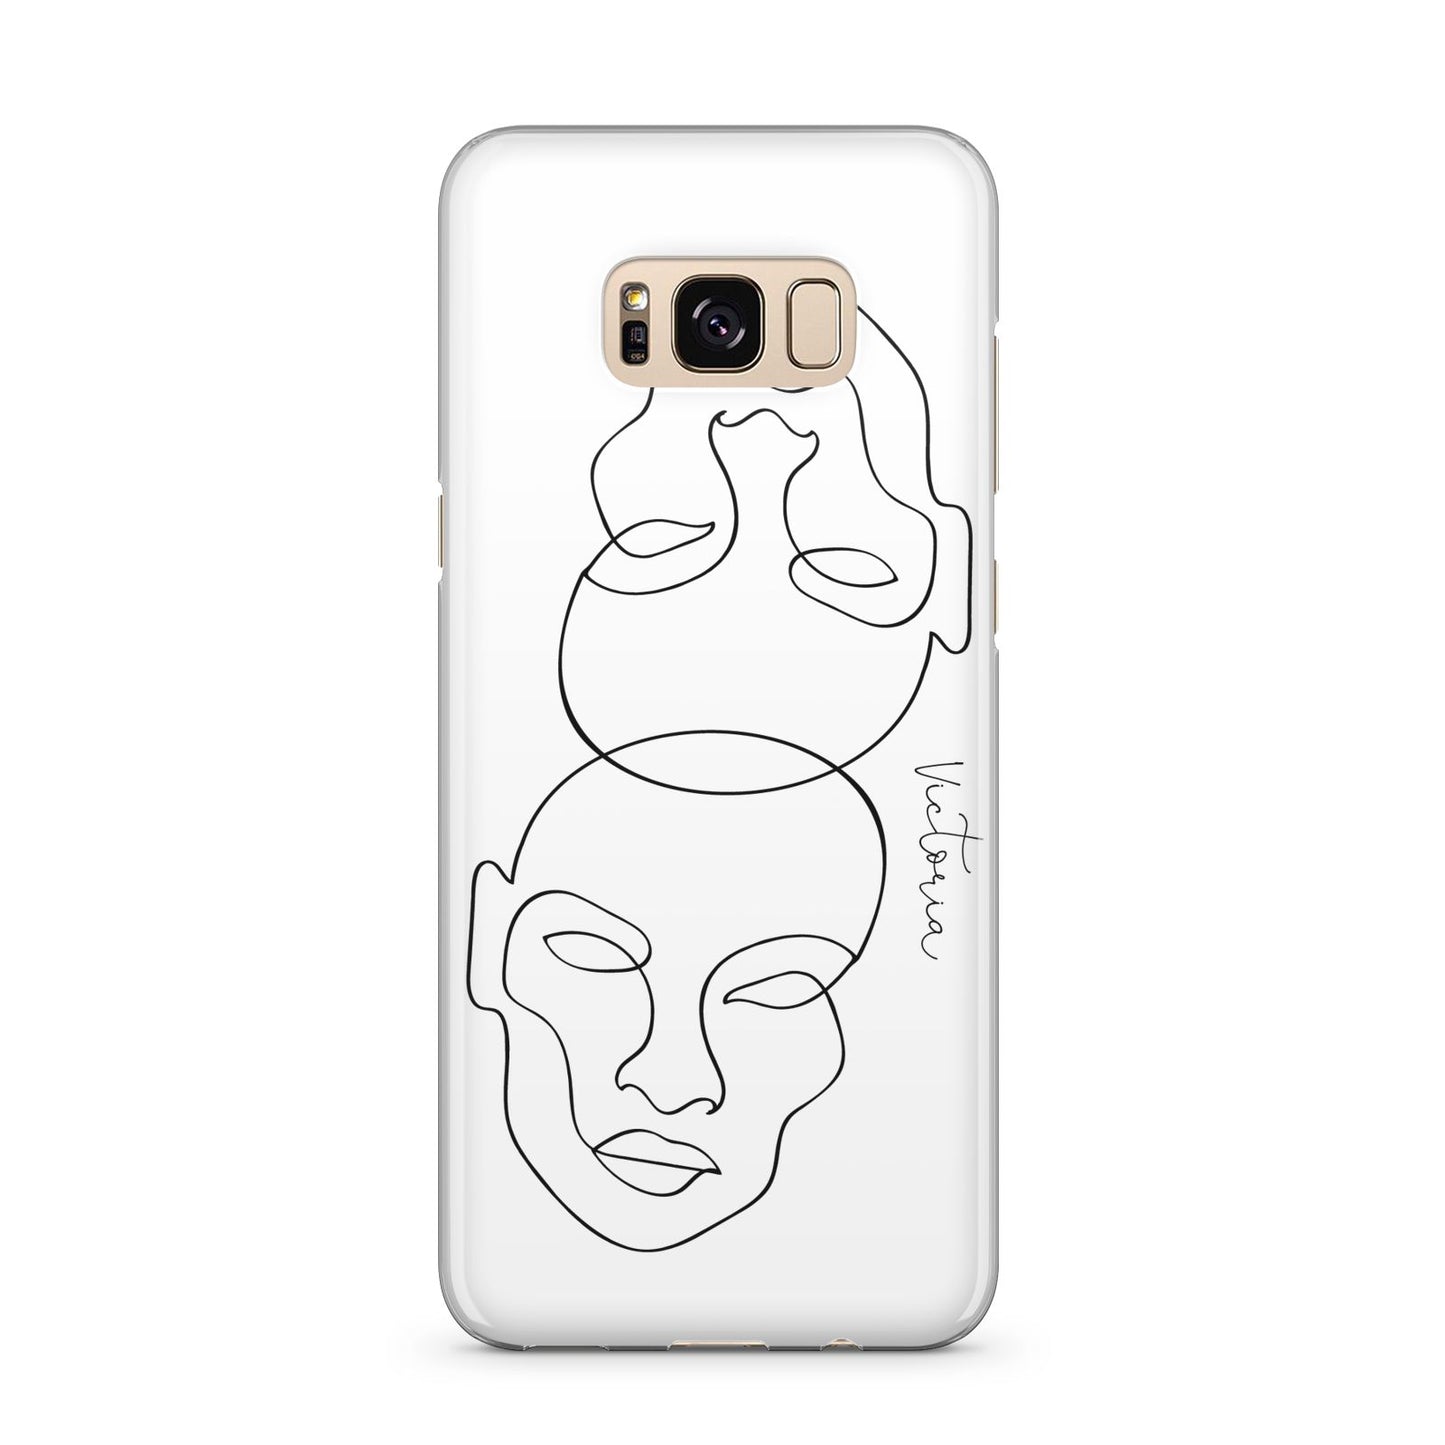 Personalised White Line Art Samsung Galaxy S8 Plus Case